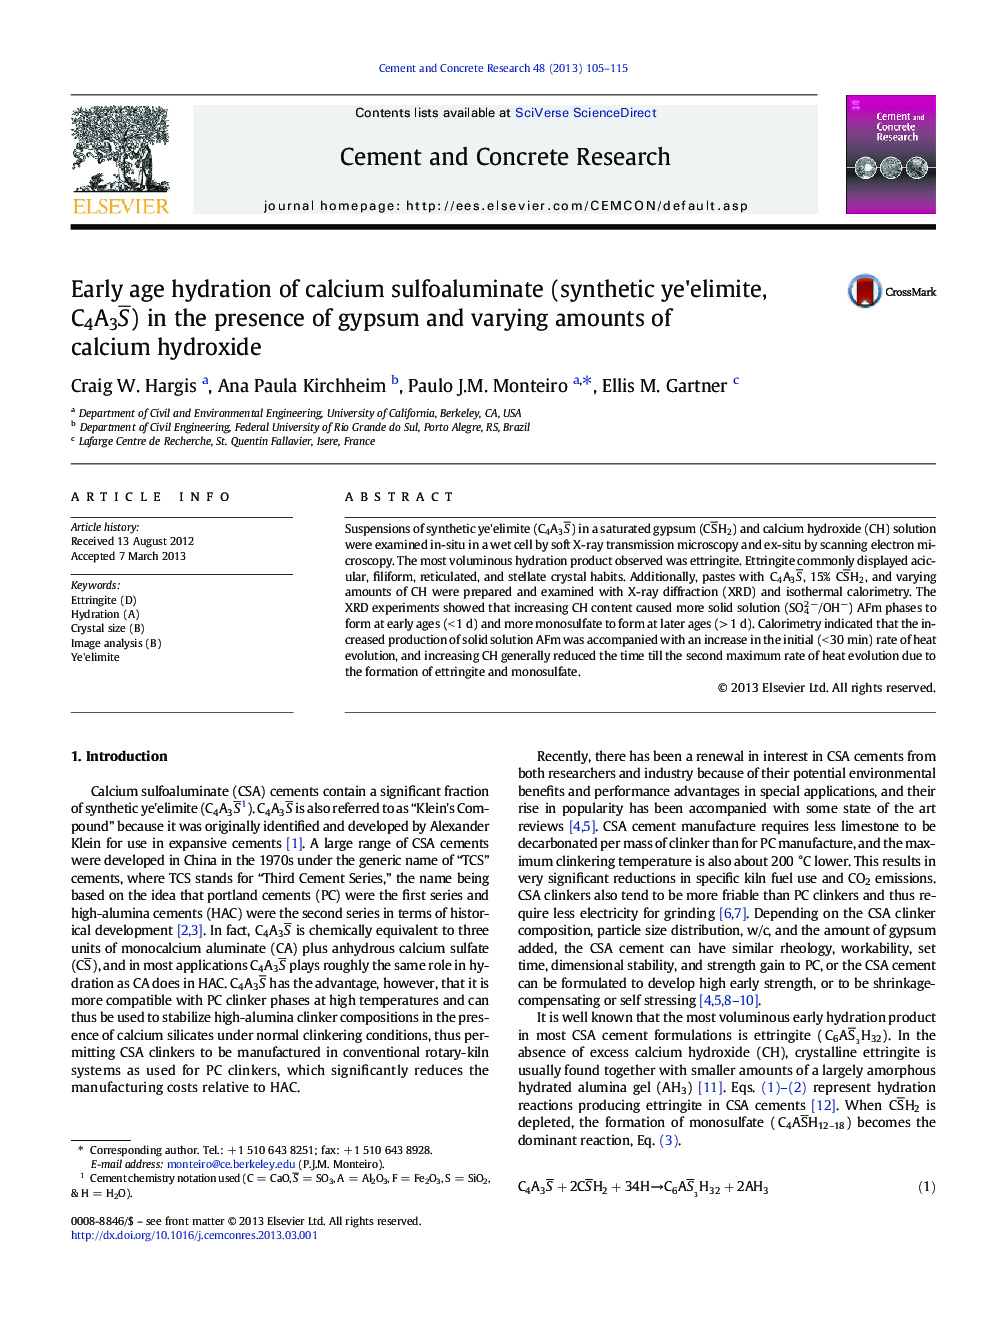 Early age hydration of calcium sulfoaluminate (synthetic ye'elimite, C4A3S¯) in the presence of gypsum and varying amounts of calcium hydroxide